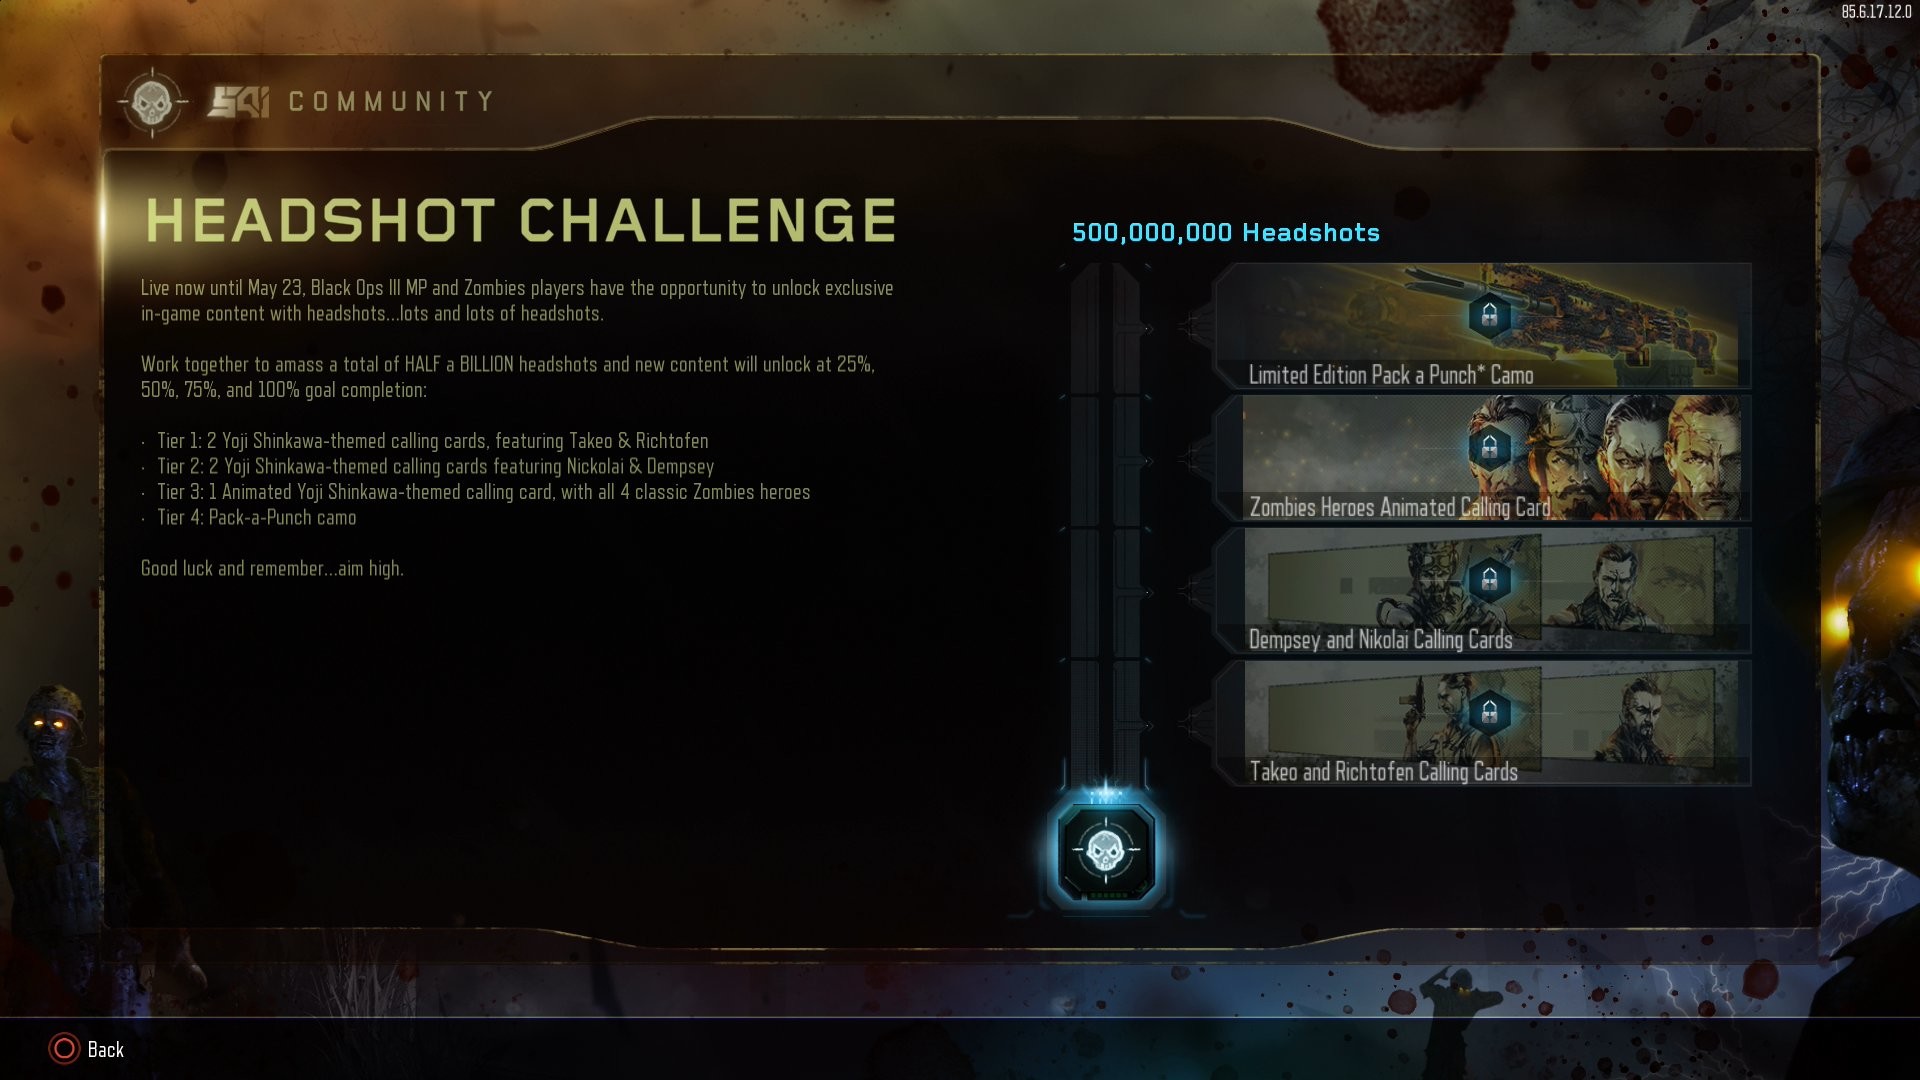 1920x1080 New Headshot Community Challenge now live in Black Ops 3 | Charlie INTEL